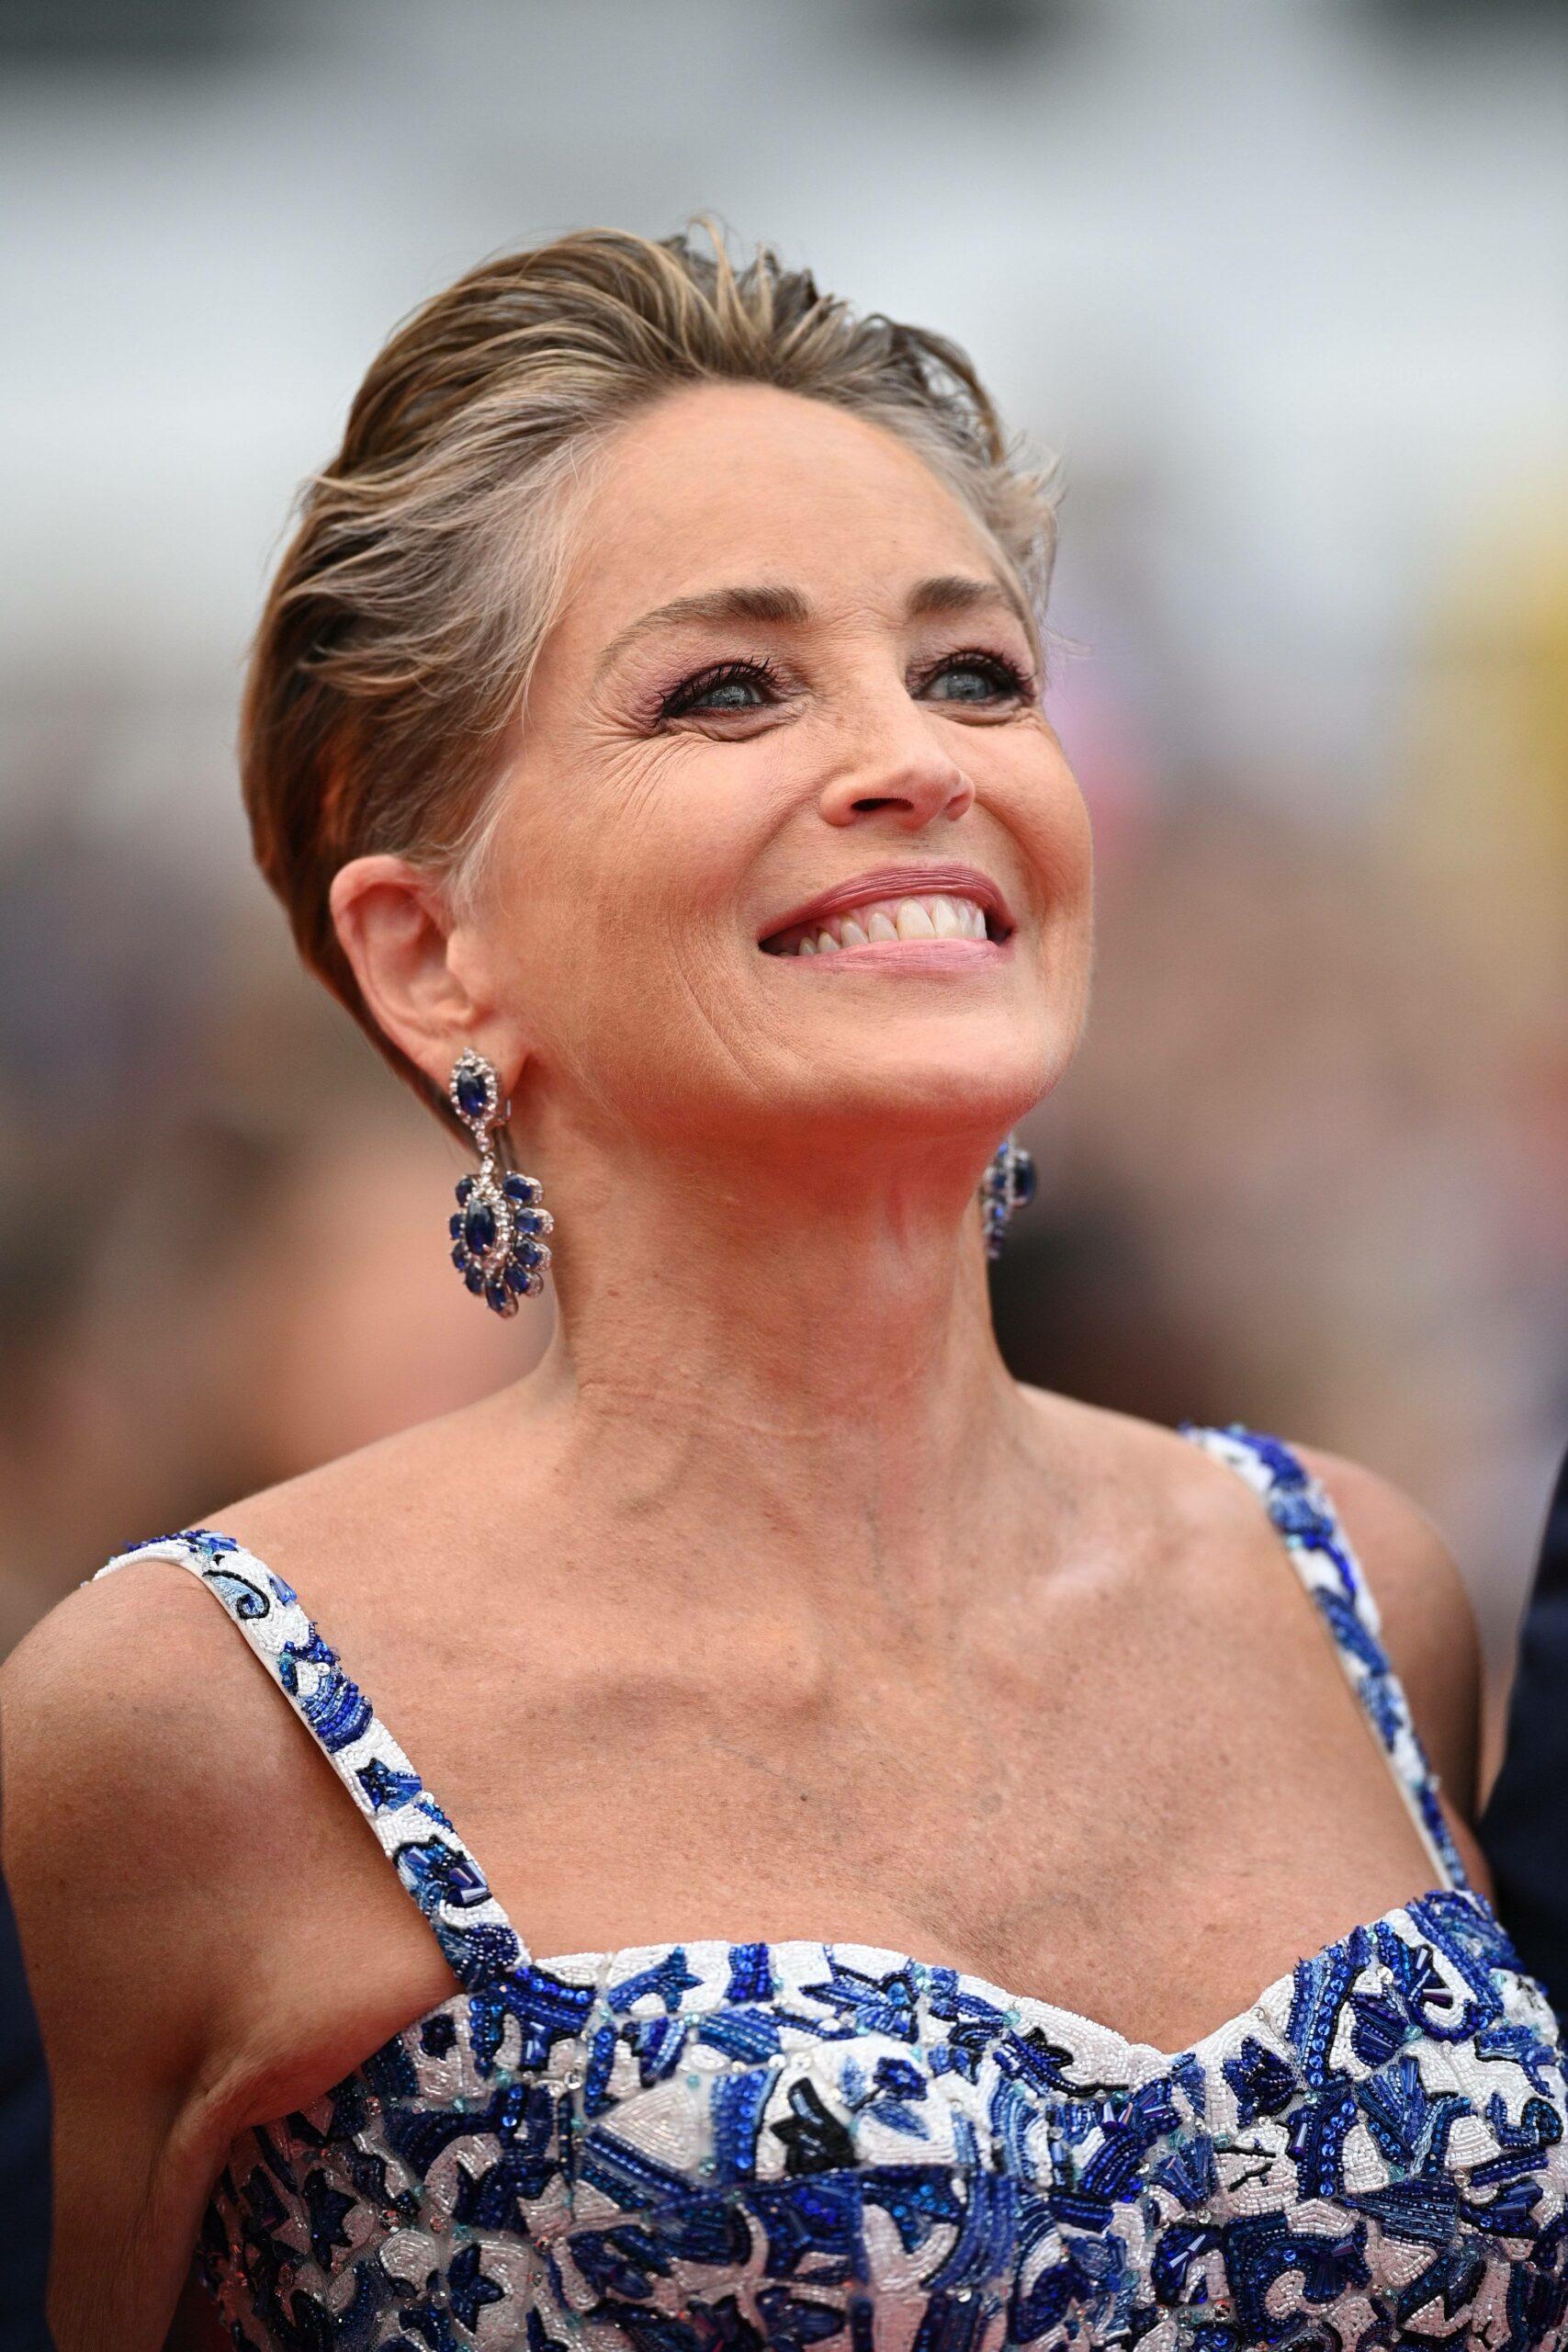 Sharon Stone at Screening of "Forever Young (Les Amandiers)" during the 75th annual Cannes film festival at Palais des Festivals on May 22, 2022 in Cannes, France.